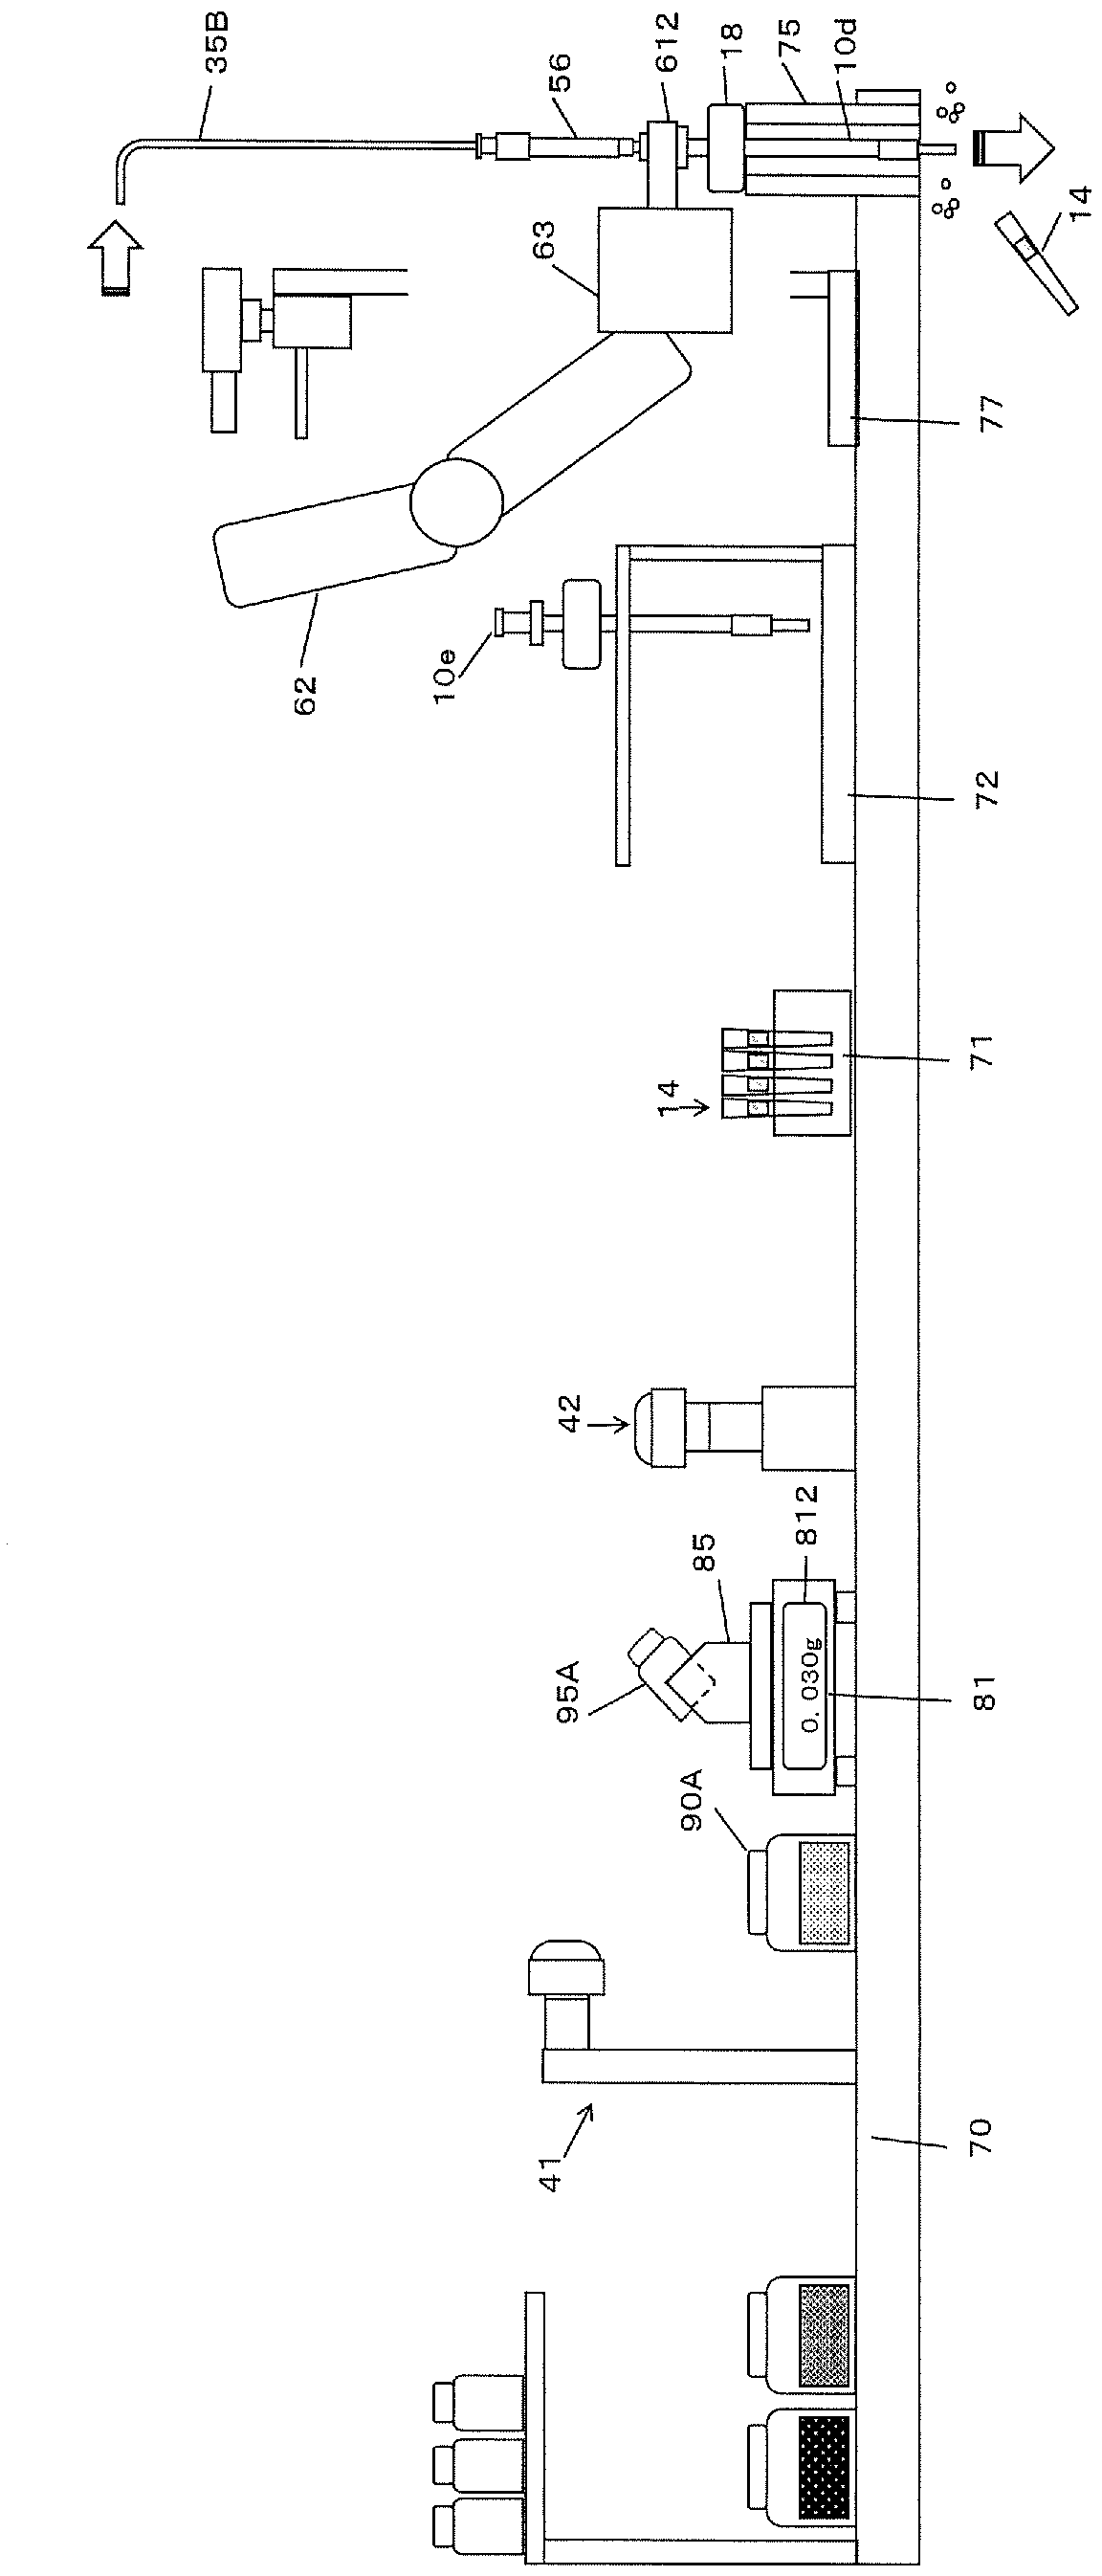 Powder collector, powder collecting device, and automatic powder collecting system